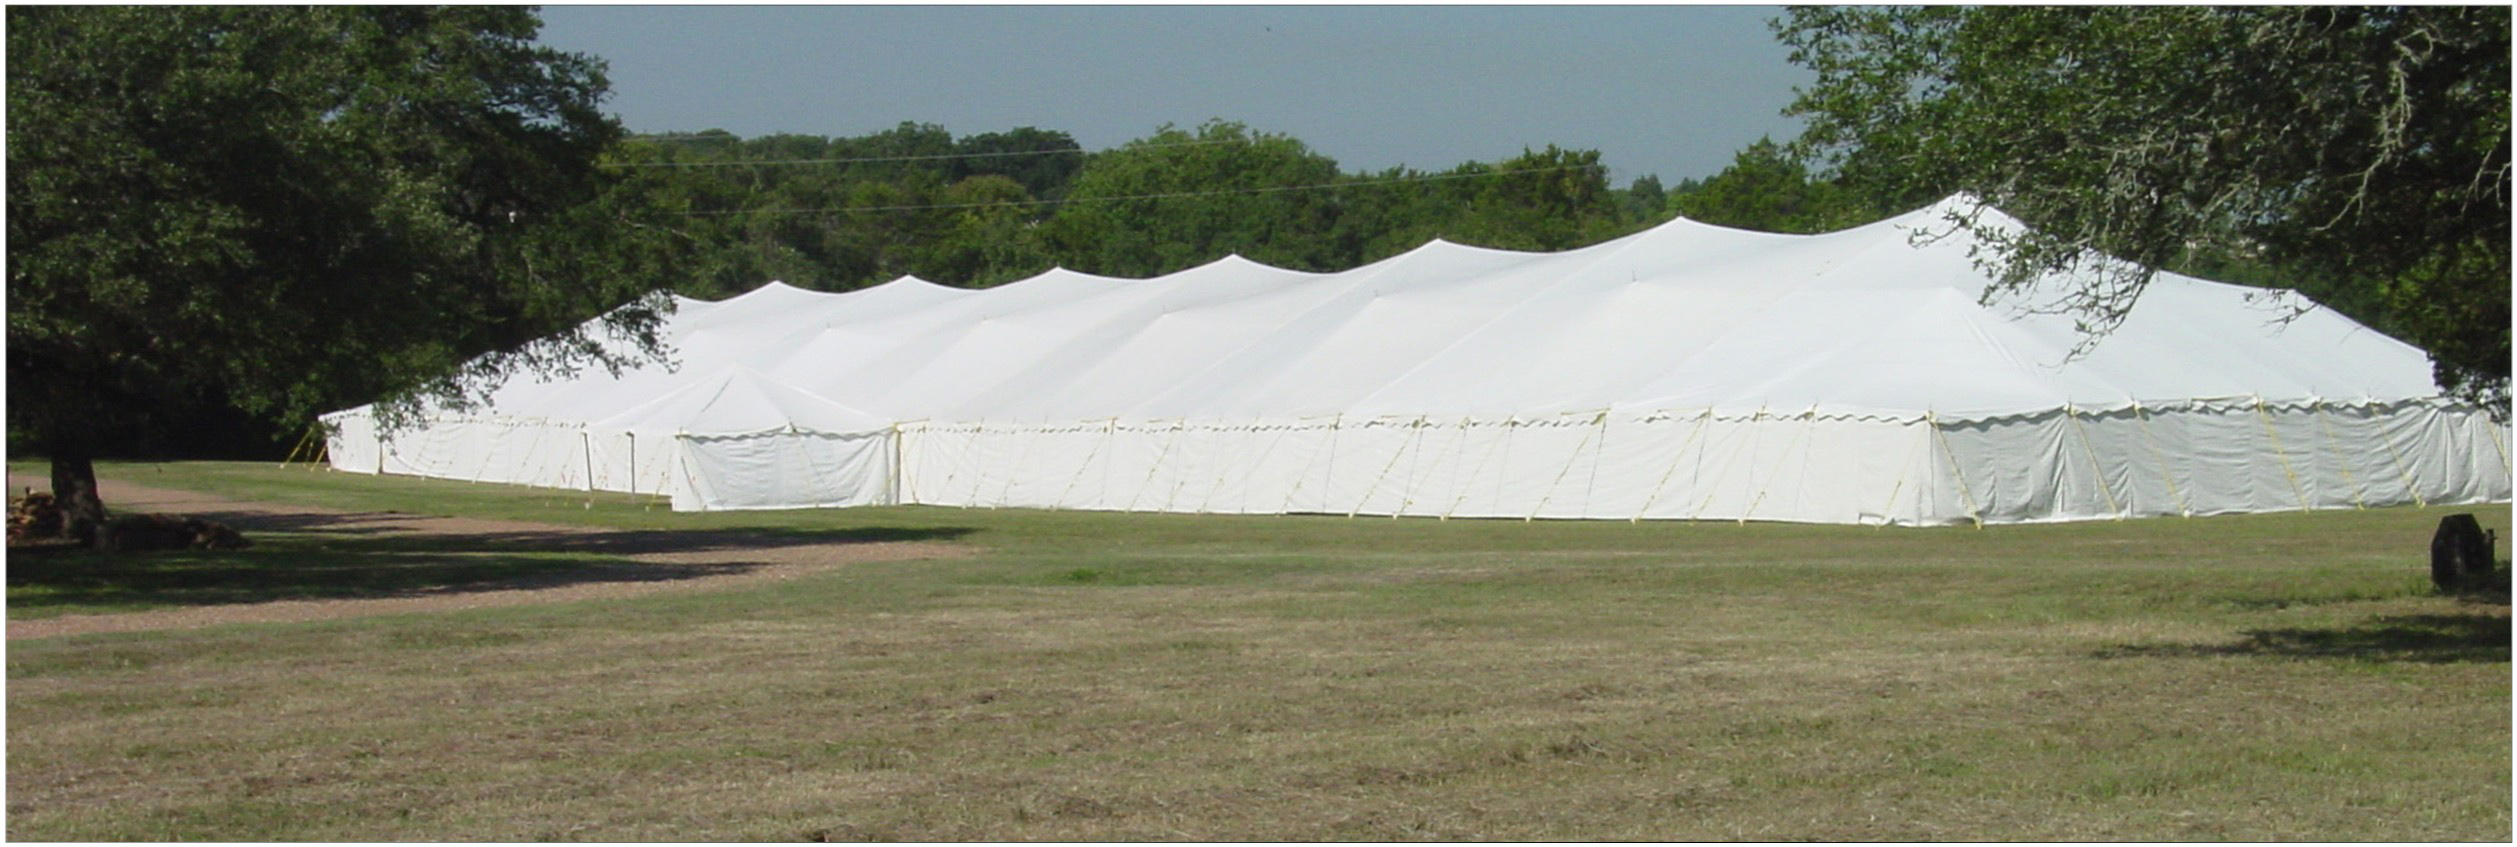 large tradional pole type party tents